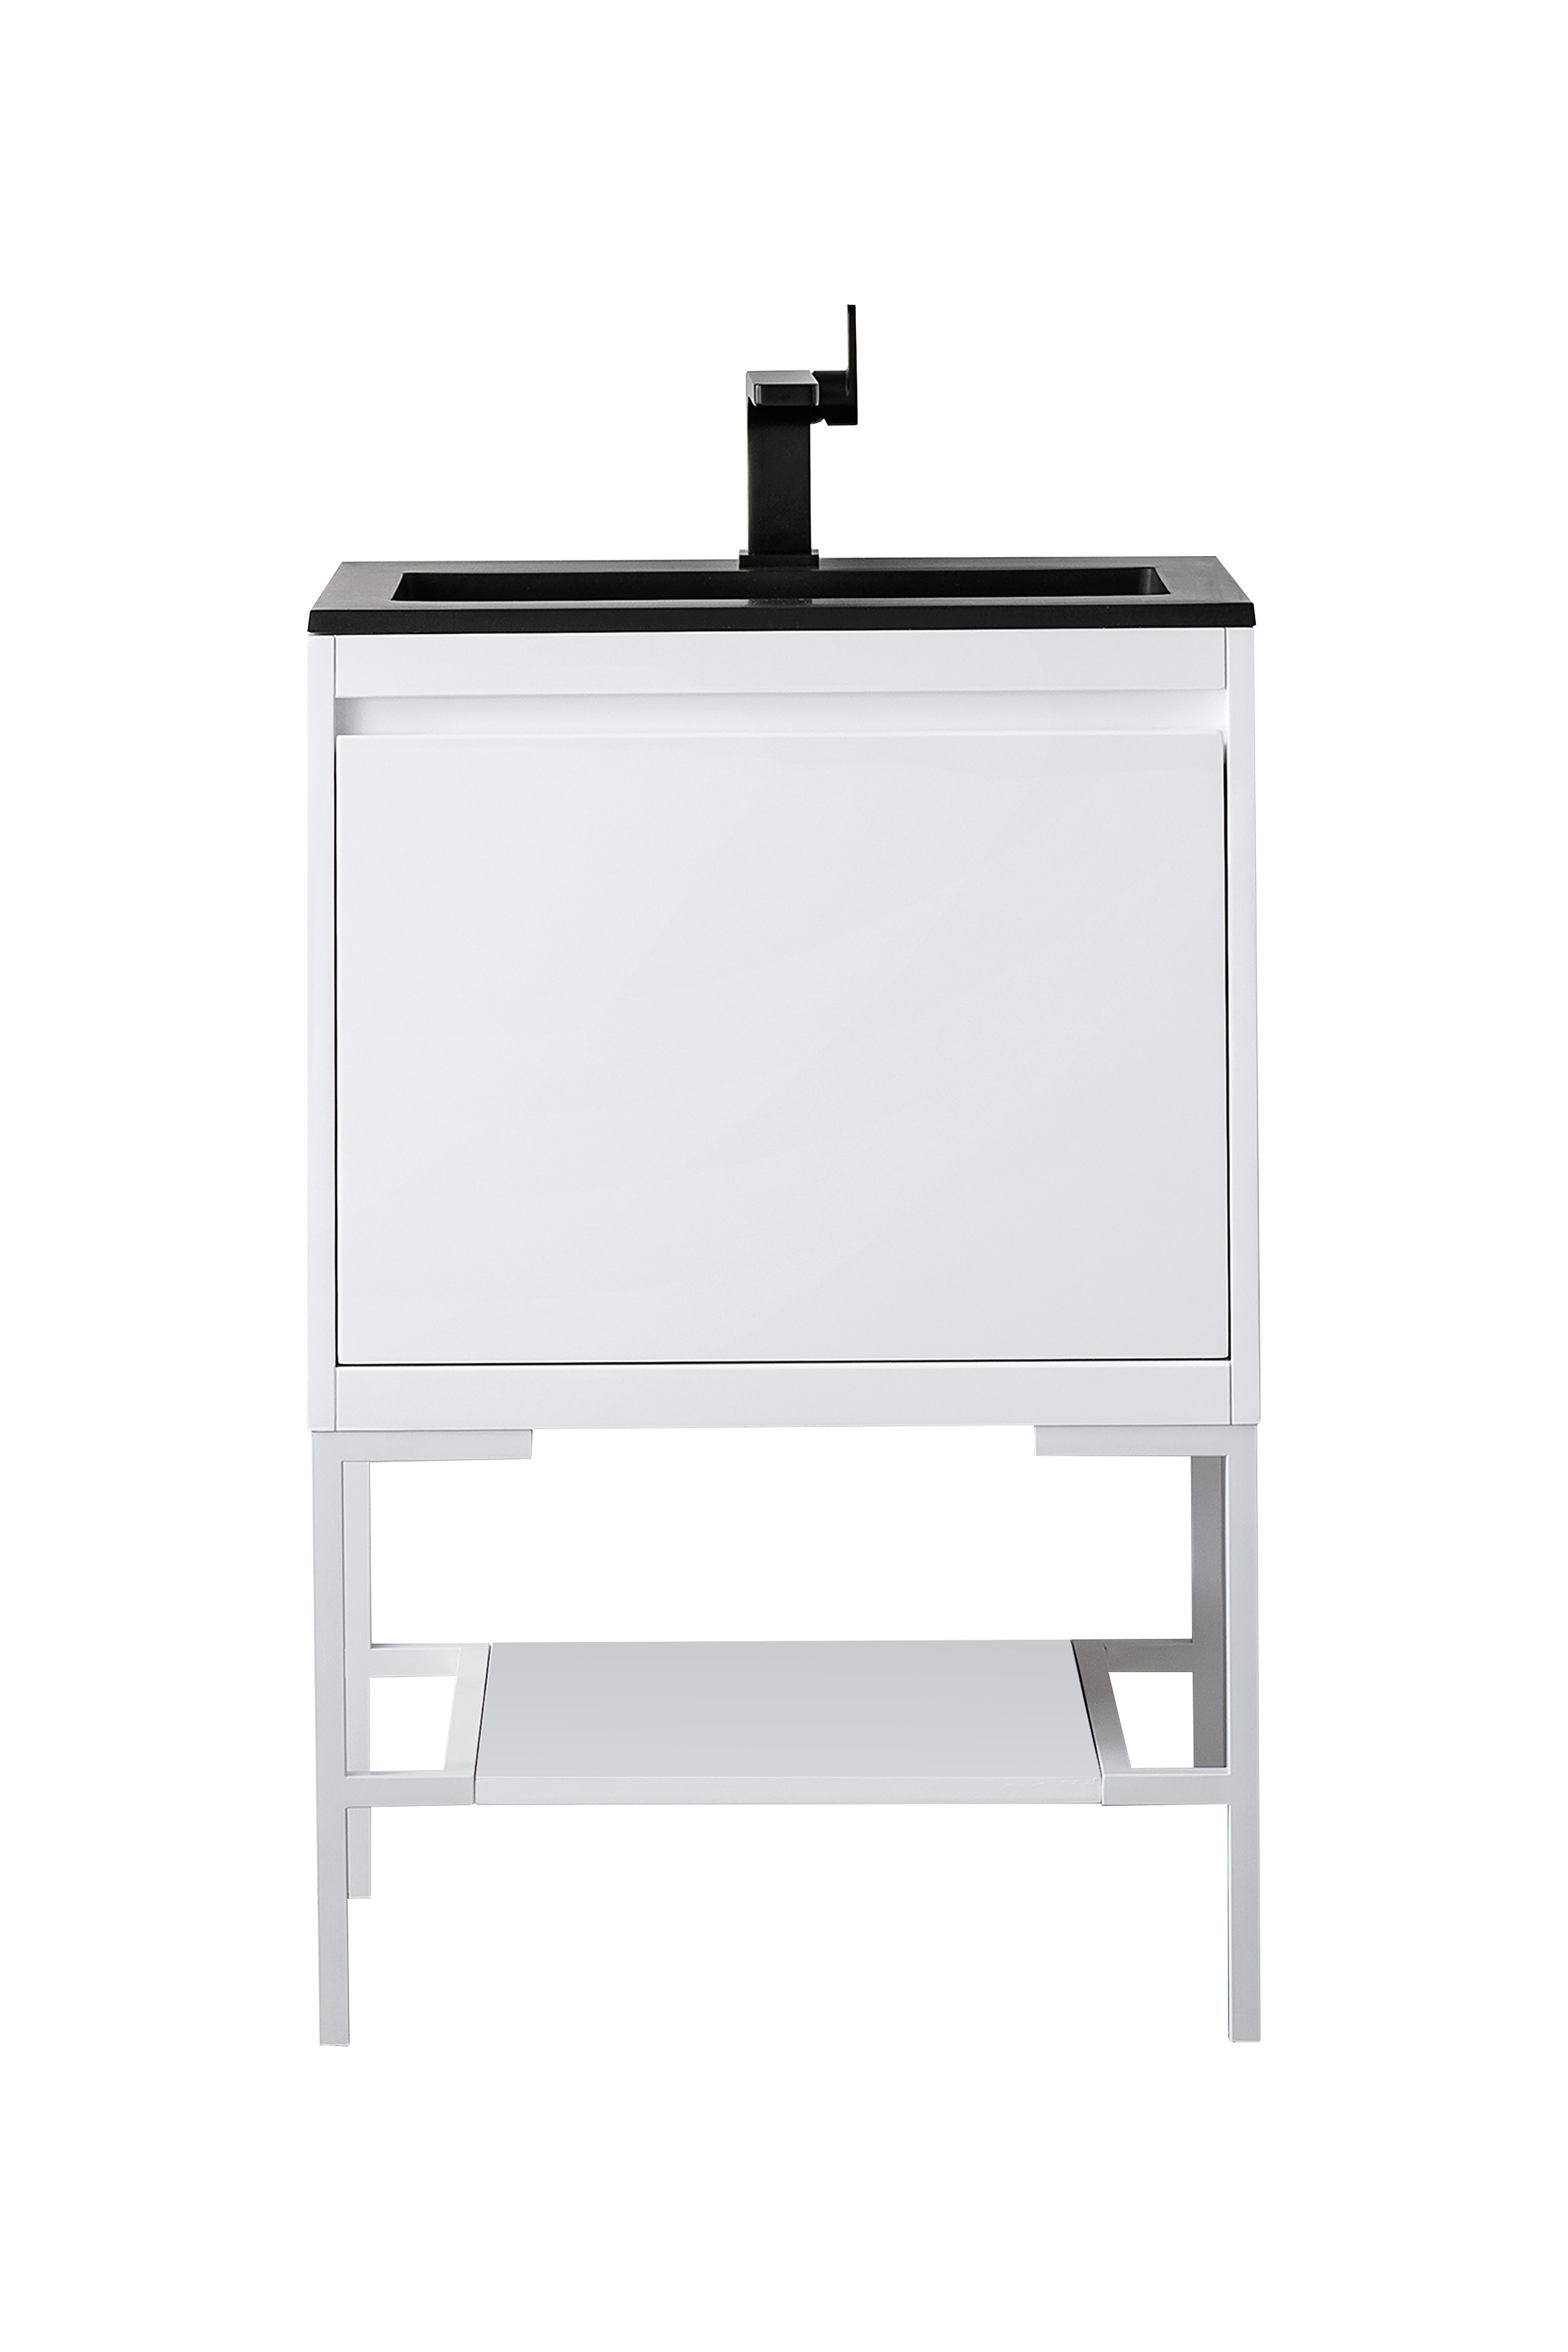 James Martin 801V23.6GWGWCHB Milan 23.6" Single Vanity Cabinet, Glossy White, Glossy White w/Charcoal Black Composite Top